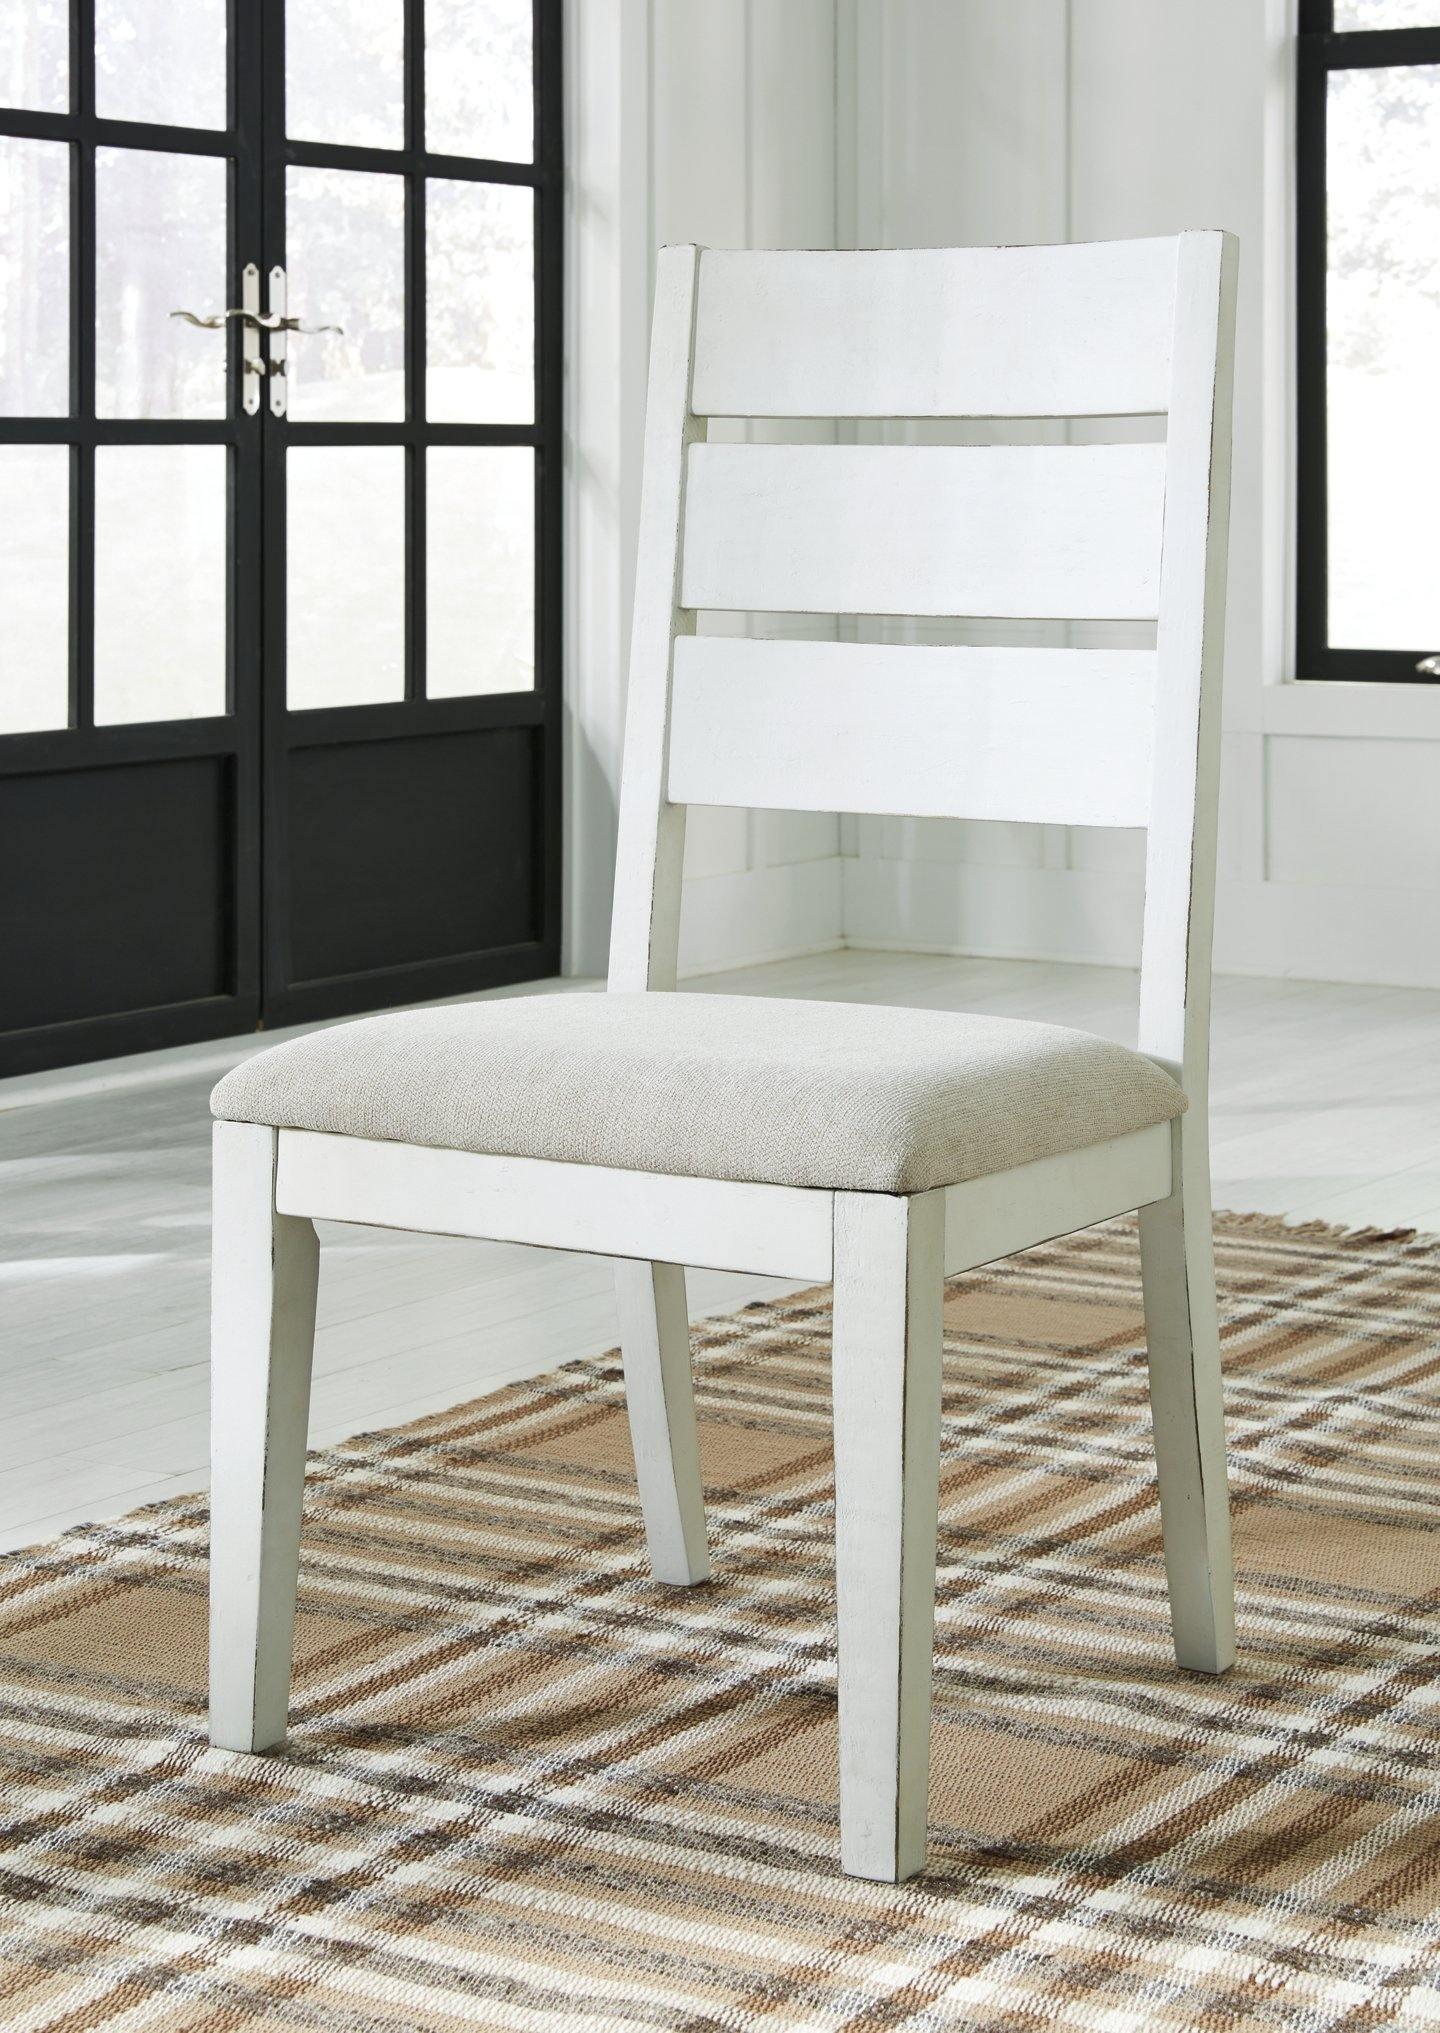 Grindleburg Dining Chair D754-01 Antique White Casual formal seating By ashley - sofafair.com